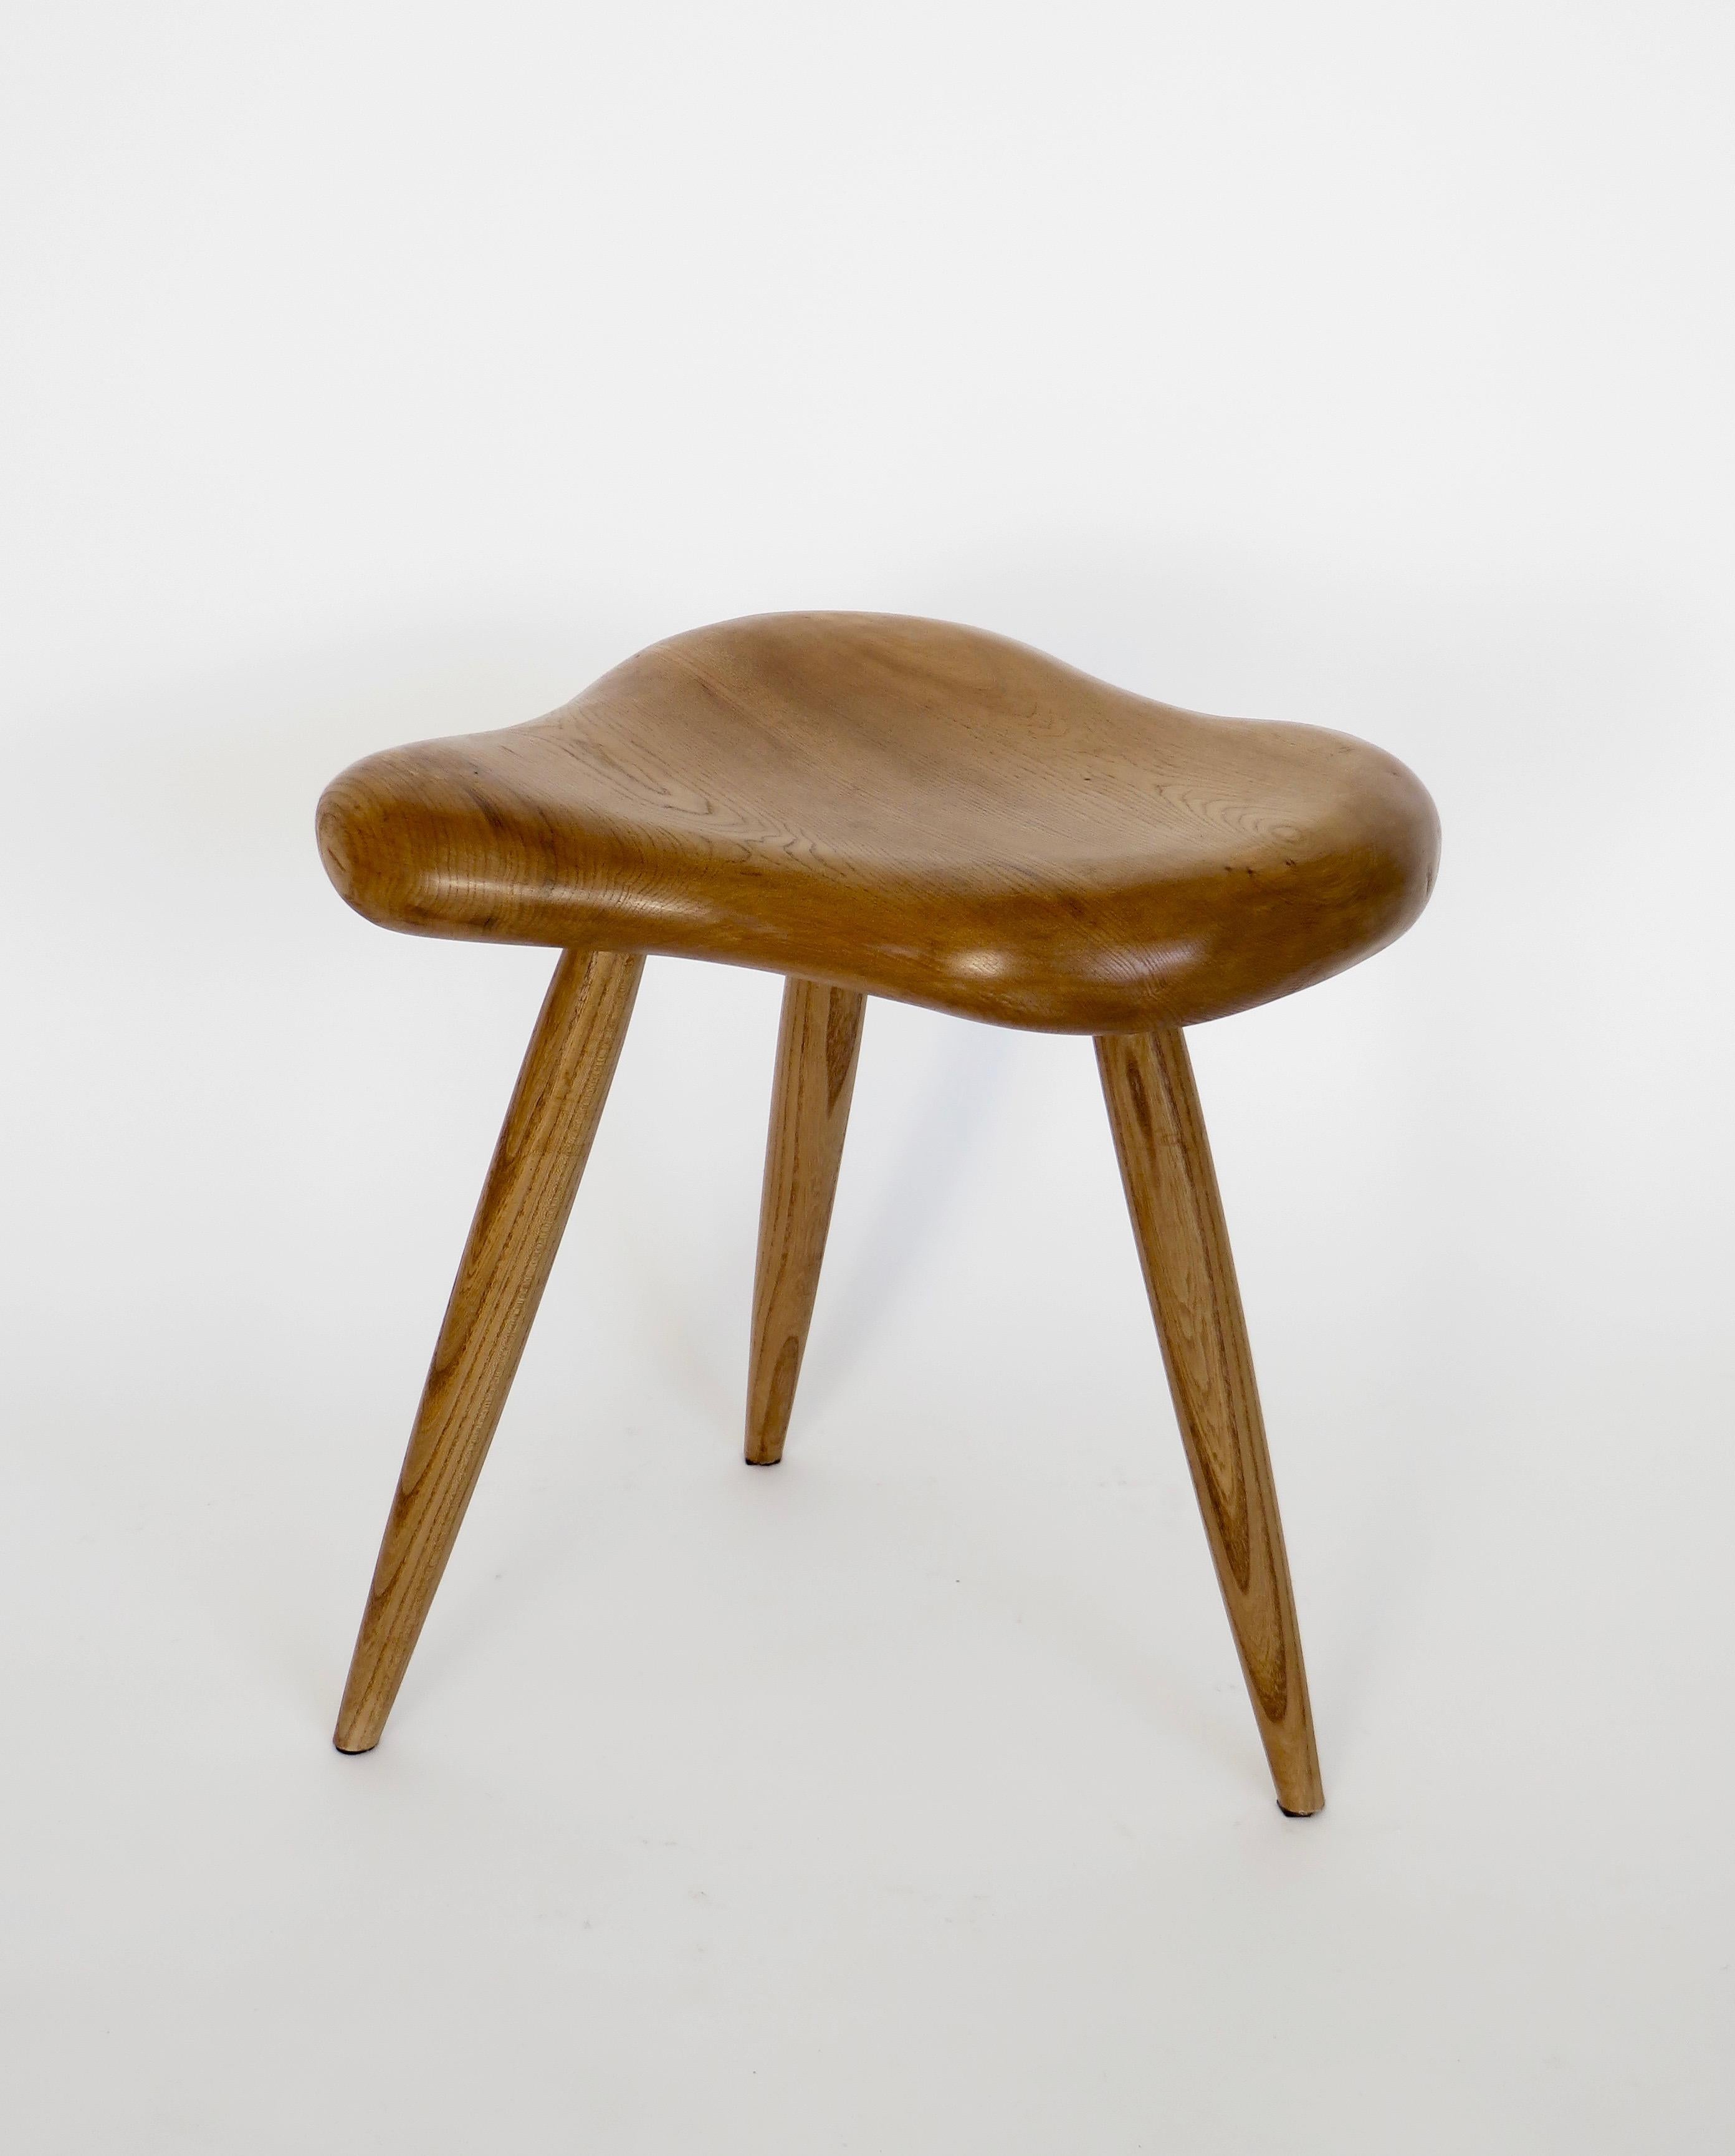 An organic freeform French elm wood stool in the taste of Alexandre Noll.
This stool is made from French elm wood. Suitable for using as a stool or a small side table.
The top is hand carved and is an undulating organic form with spindle hand turned